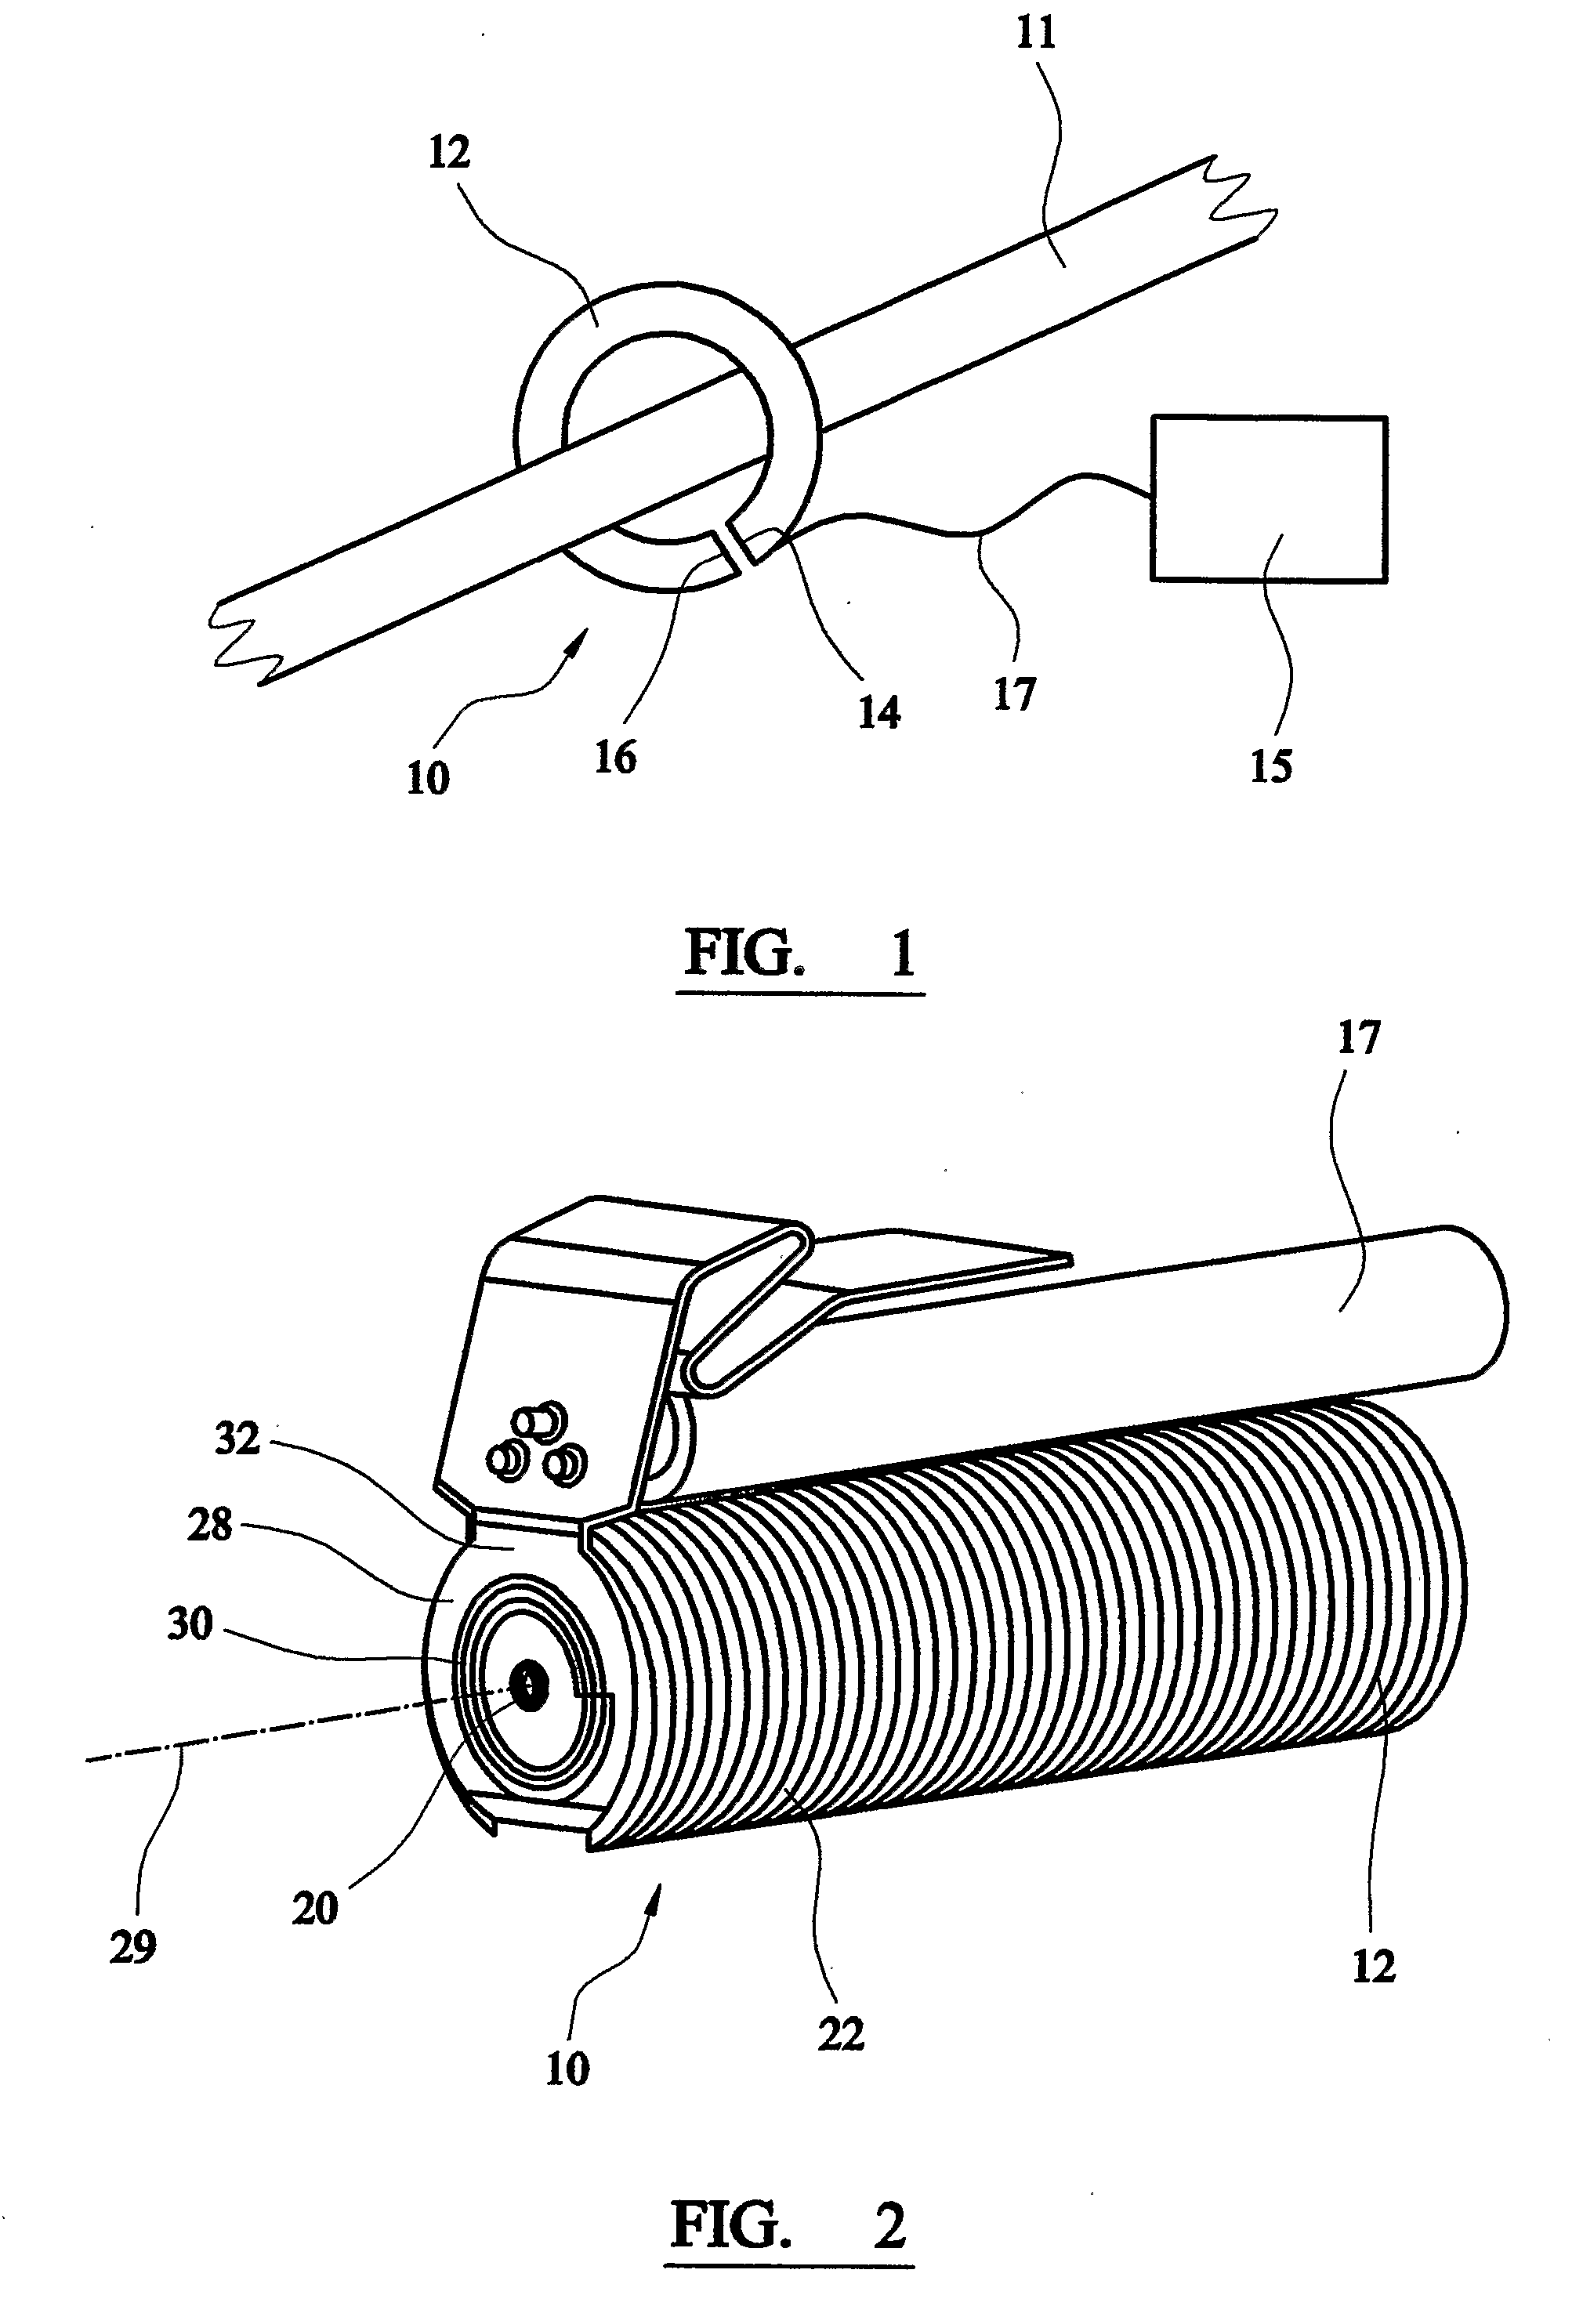 Method and Apparatus for Measuring Current